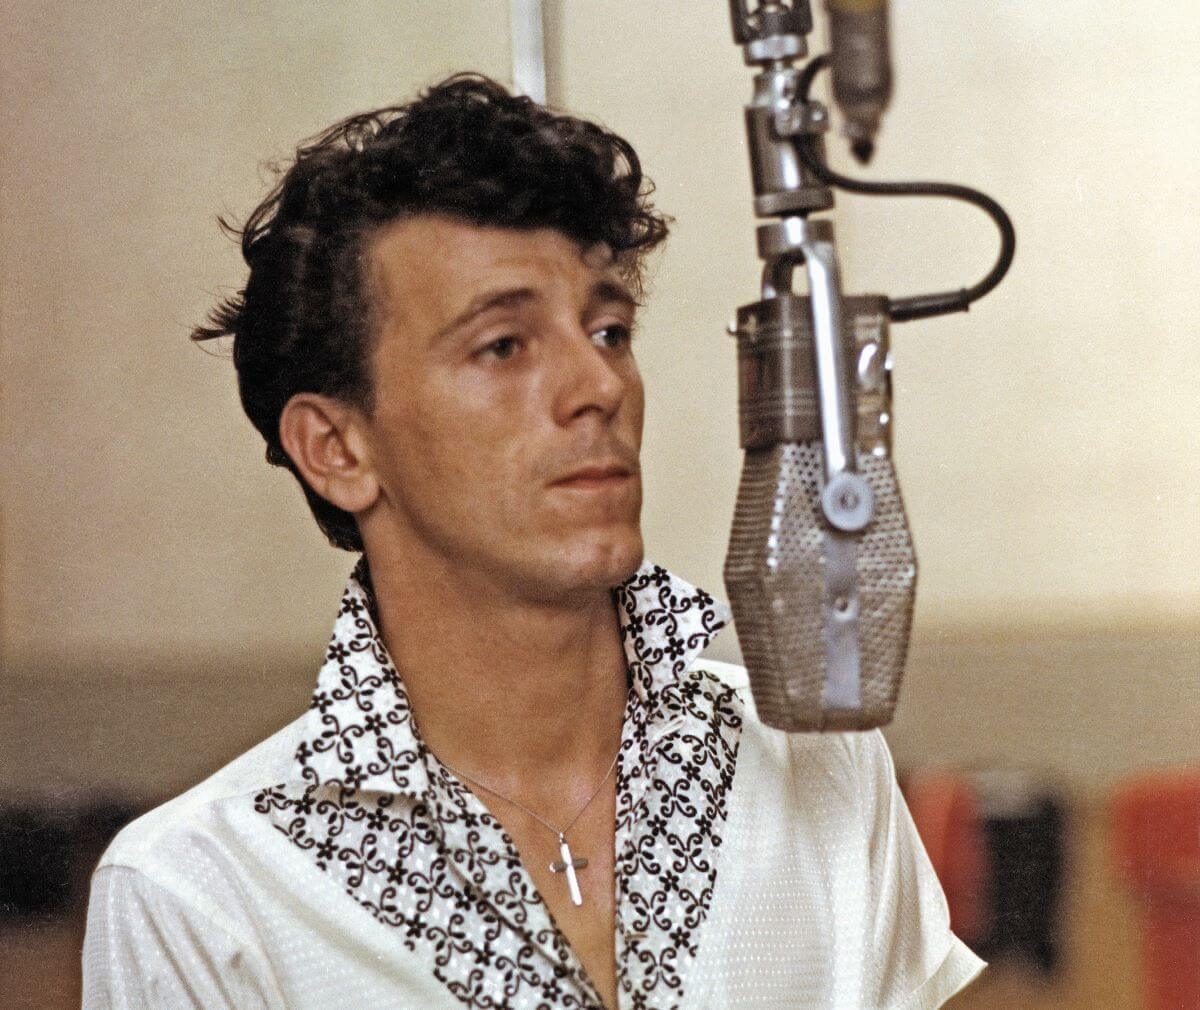 Gene Vincent wears a white shirt with a black and white patterned collar and a silver cross necklace. He stands in front of a microphone.